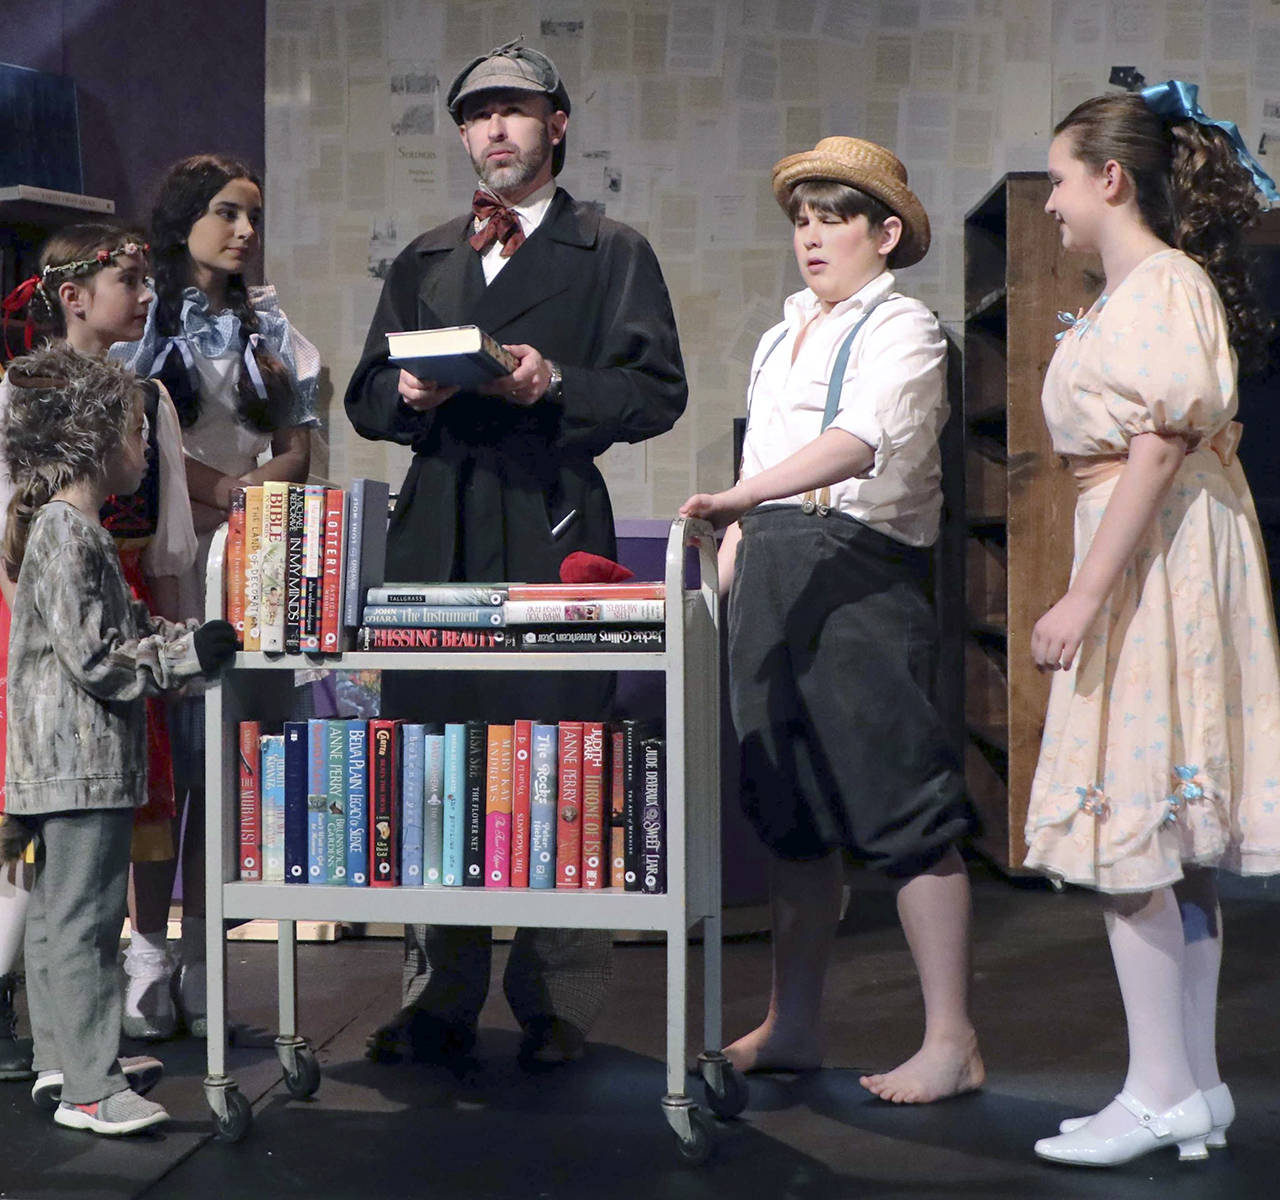 (Photo by Keith J. Krueger) Sherlock Holmes (played by Adam Turpin), center, speaks with other characters, from left: Toto (Aubriel Muñoz), Heidi (Emily Mefford), Dorothy (Alena Membreño), Tom Sawyer (Michael Turpin) and Pollyanna (Madi Valentine).